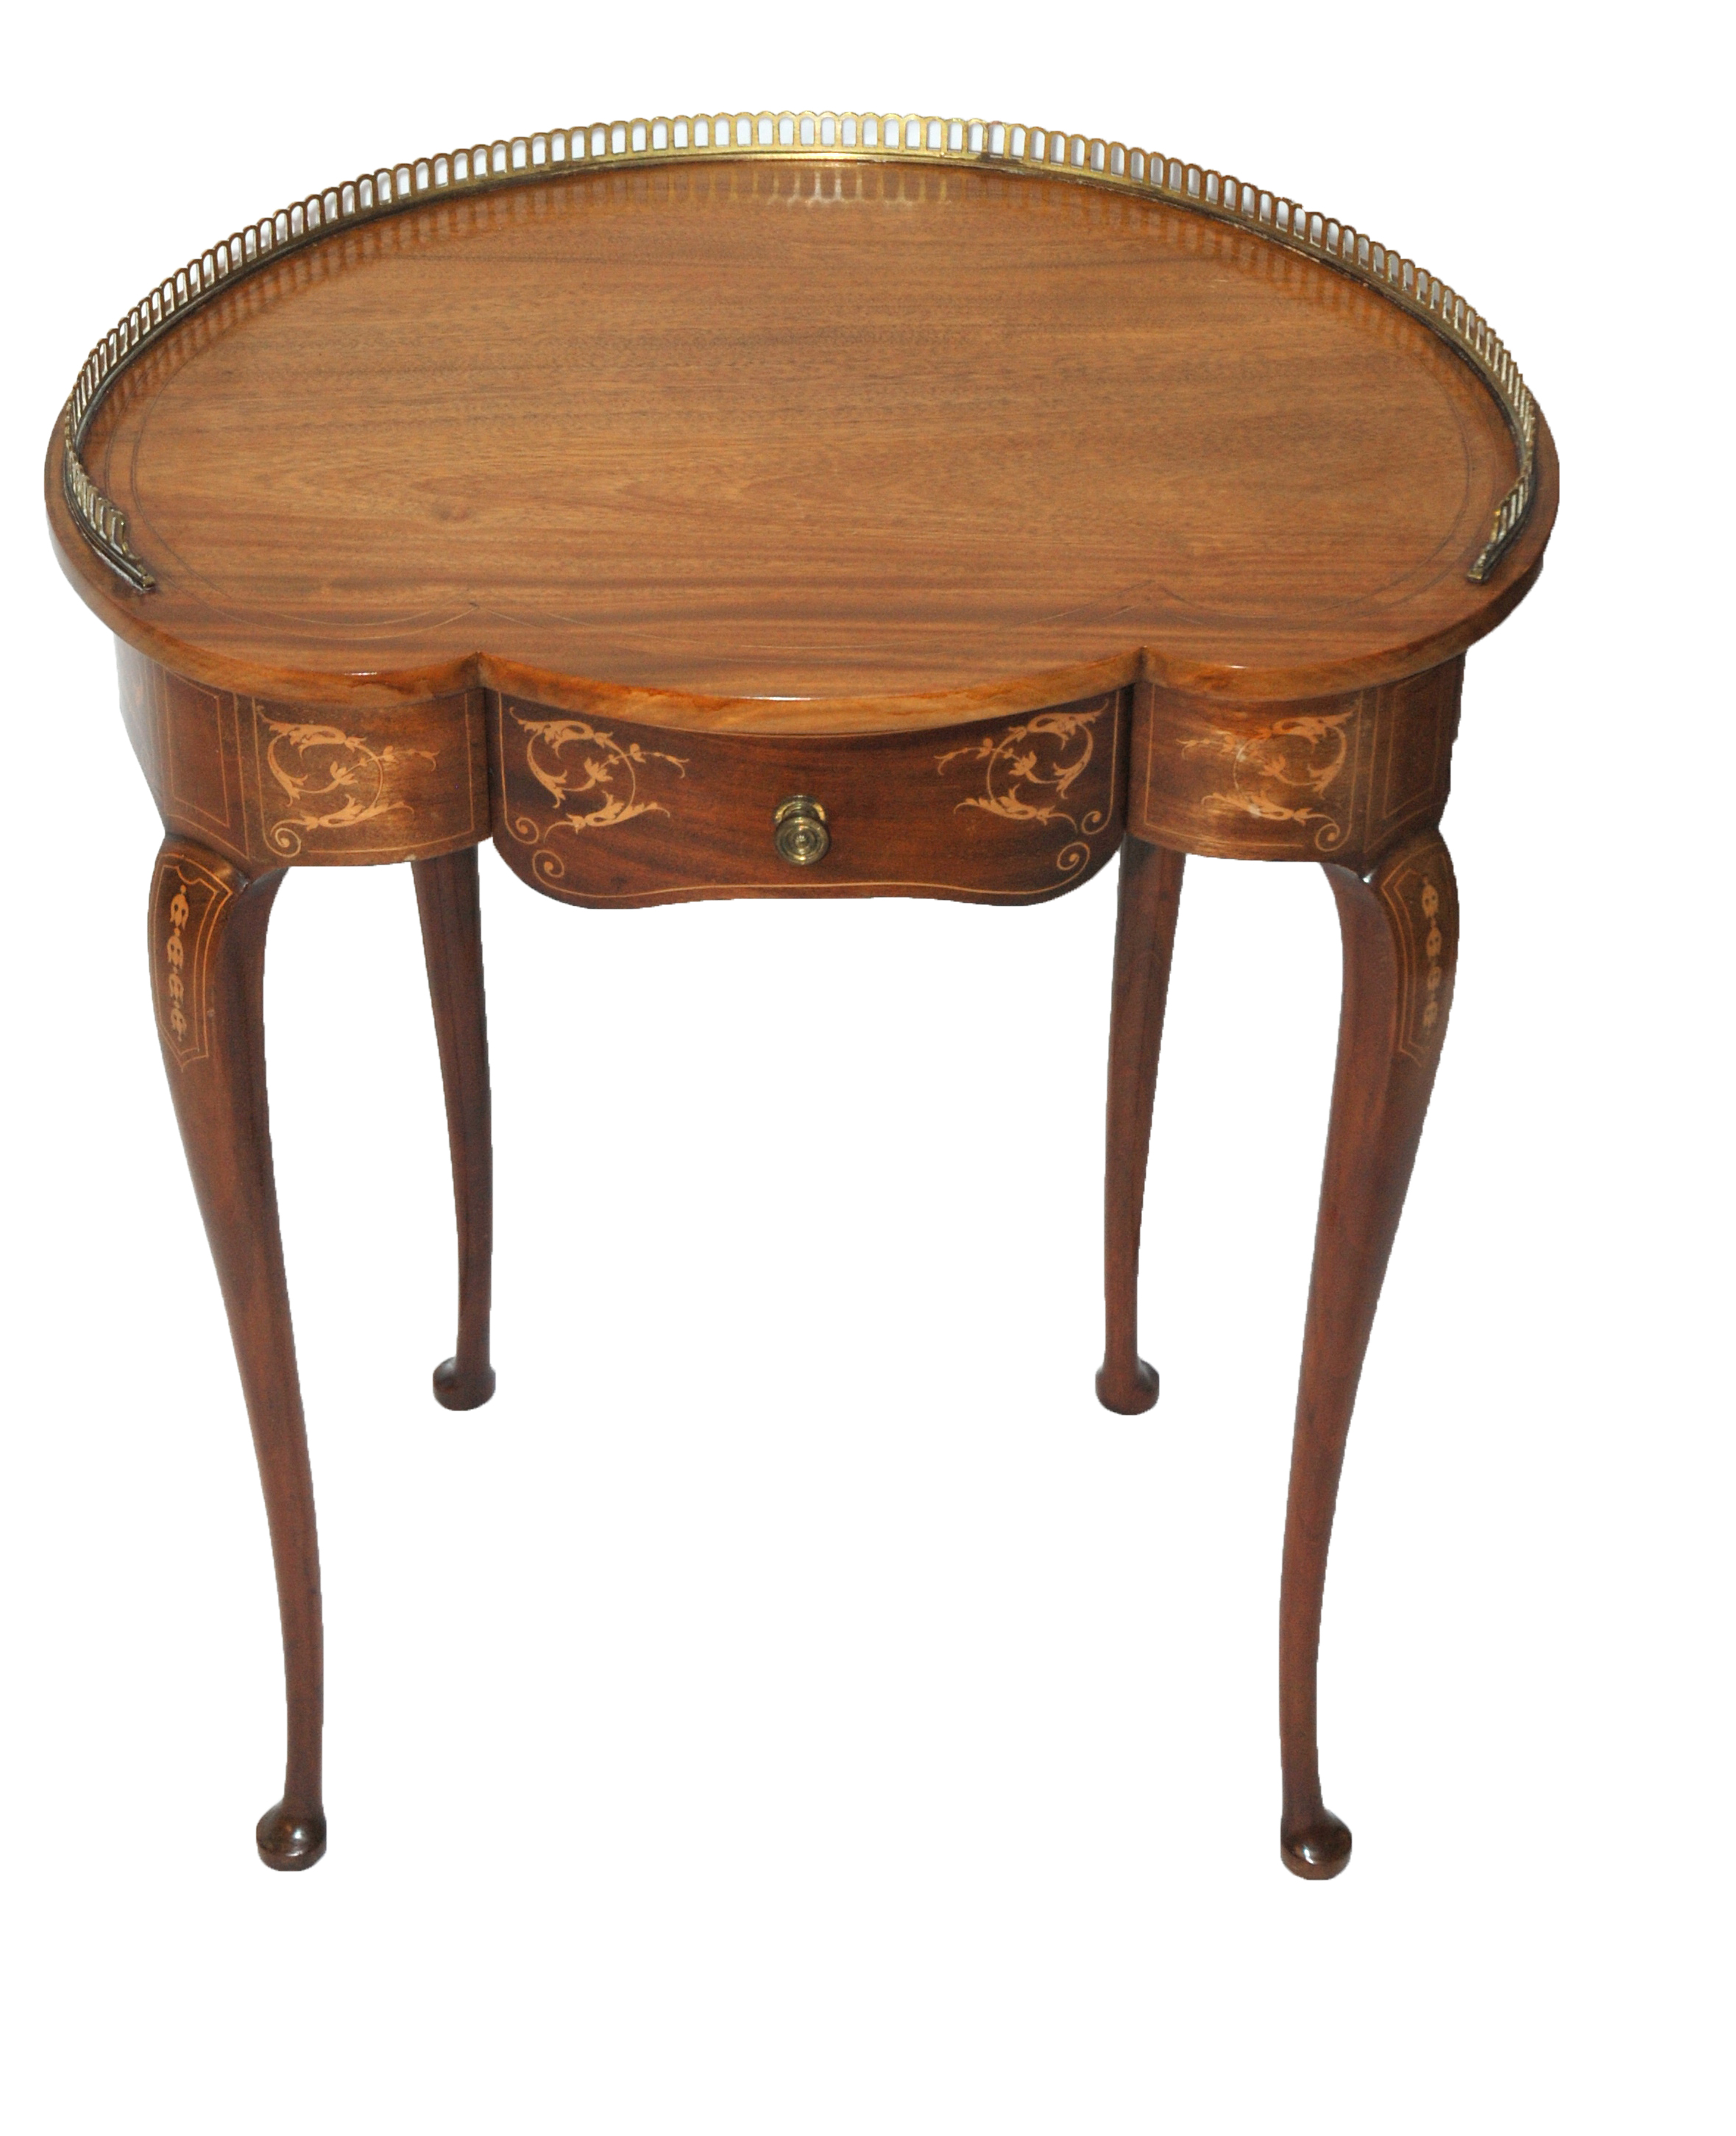 An Edwardian rosewood and inlaid kidney shaped ladies writing desk with three quarter brass